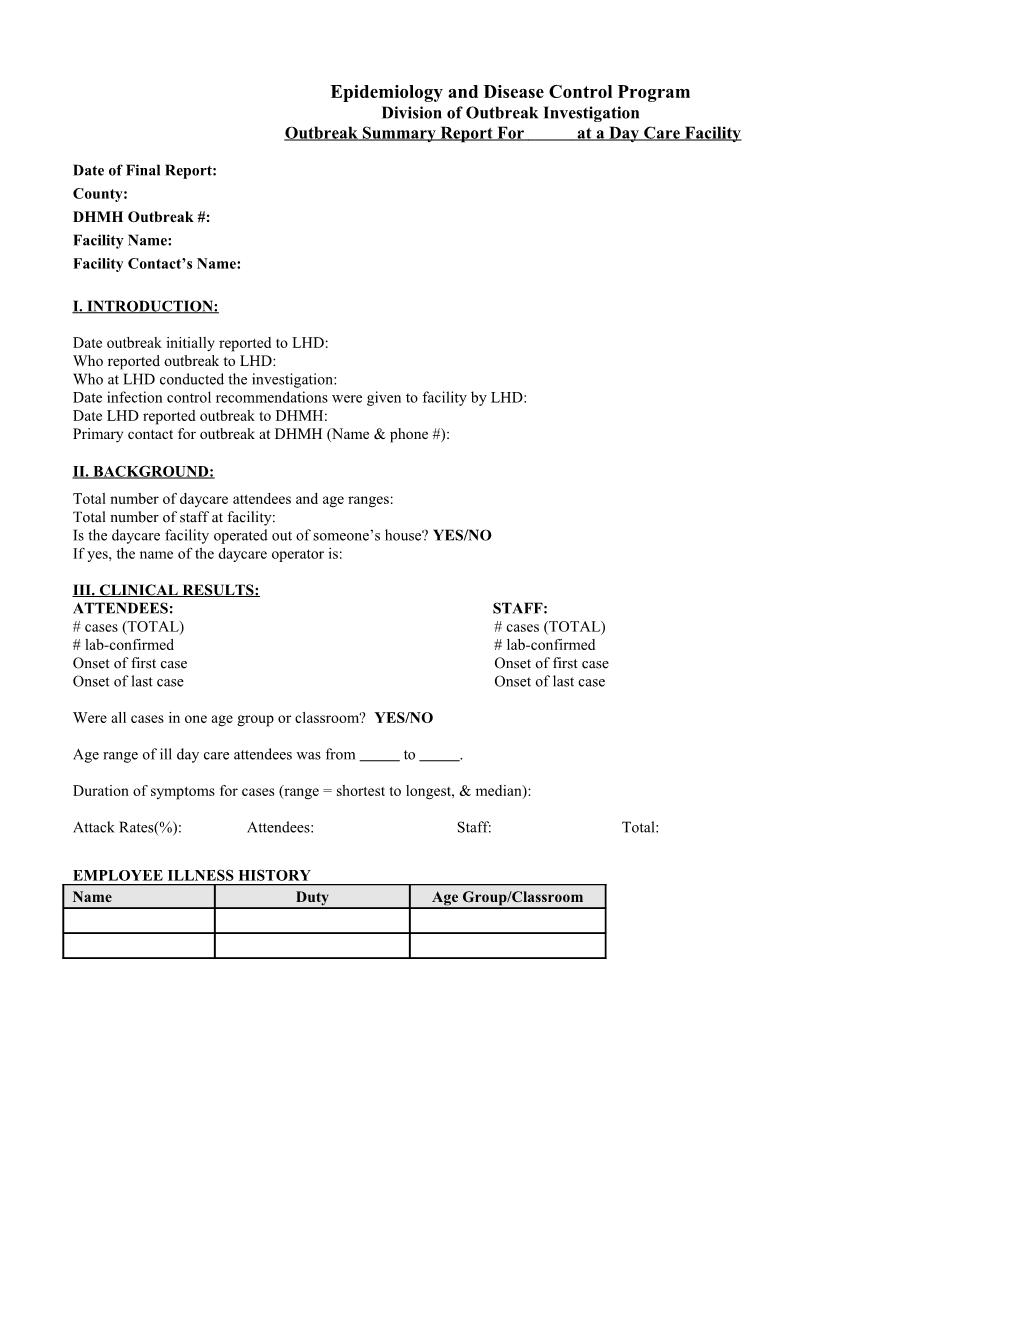 Supplementary Final Report Form for Outbreak Investigation